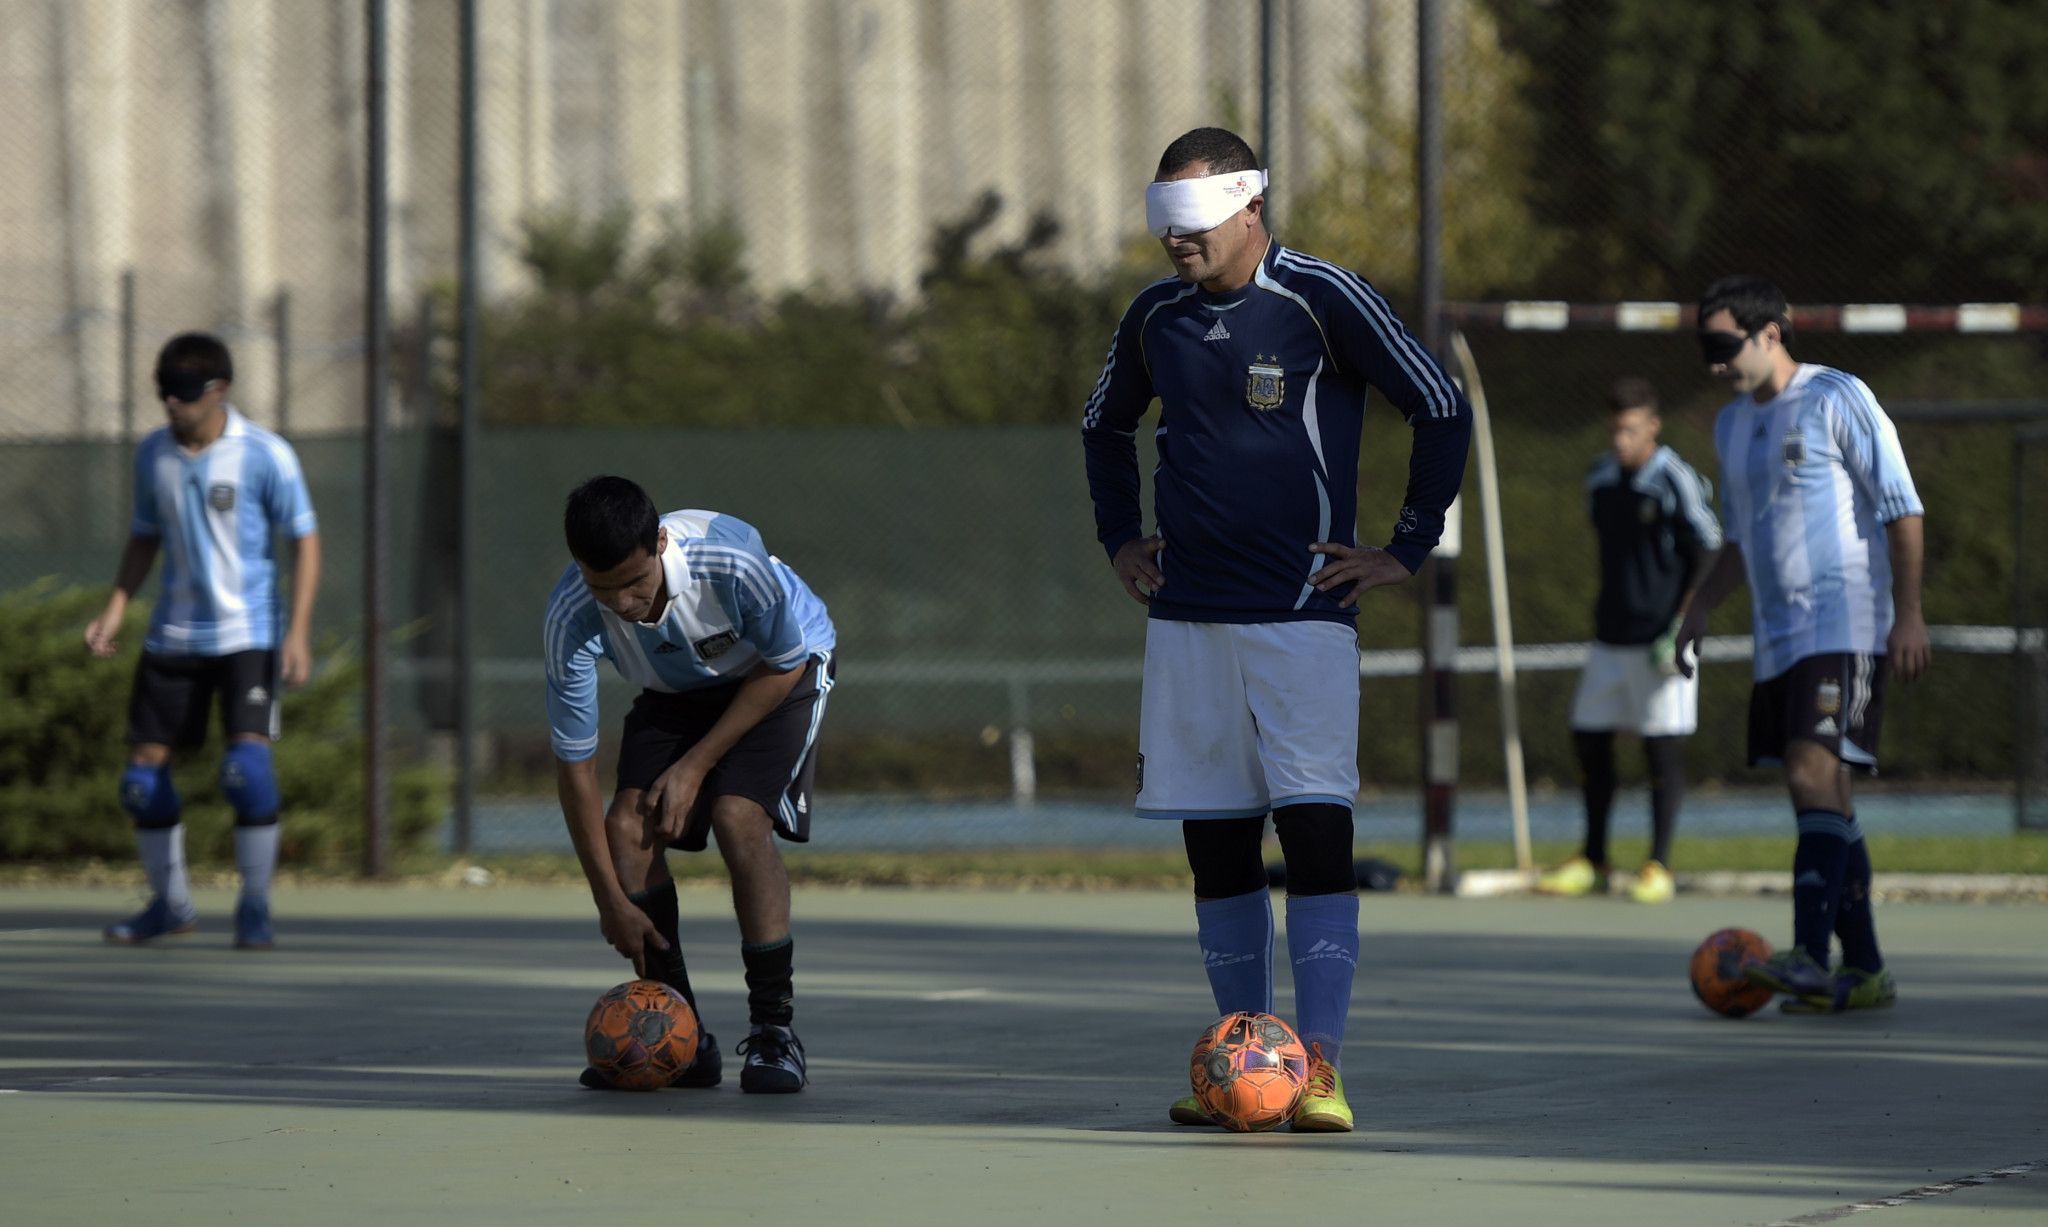 The IBSA Blind Football Americas Championships is being held at the Brazil Paralympic Training Centre in São Paulo where Argentina will be renewing their rivalry with hosts Brazil ©Getty Images